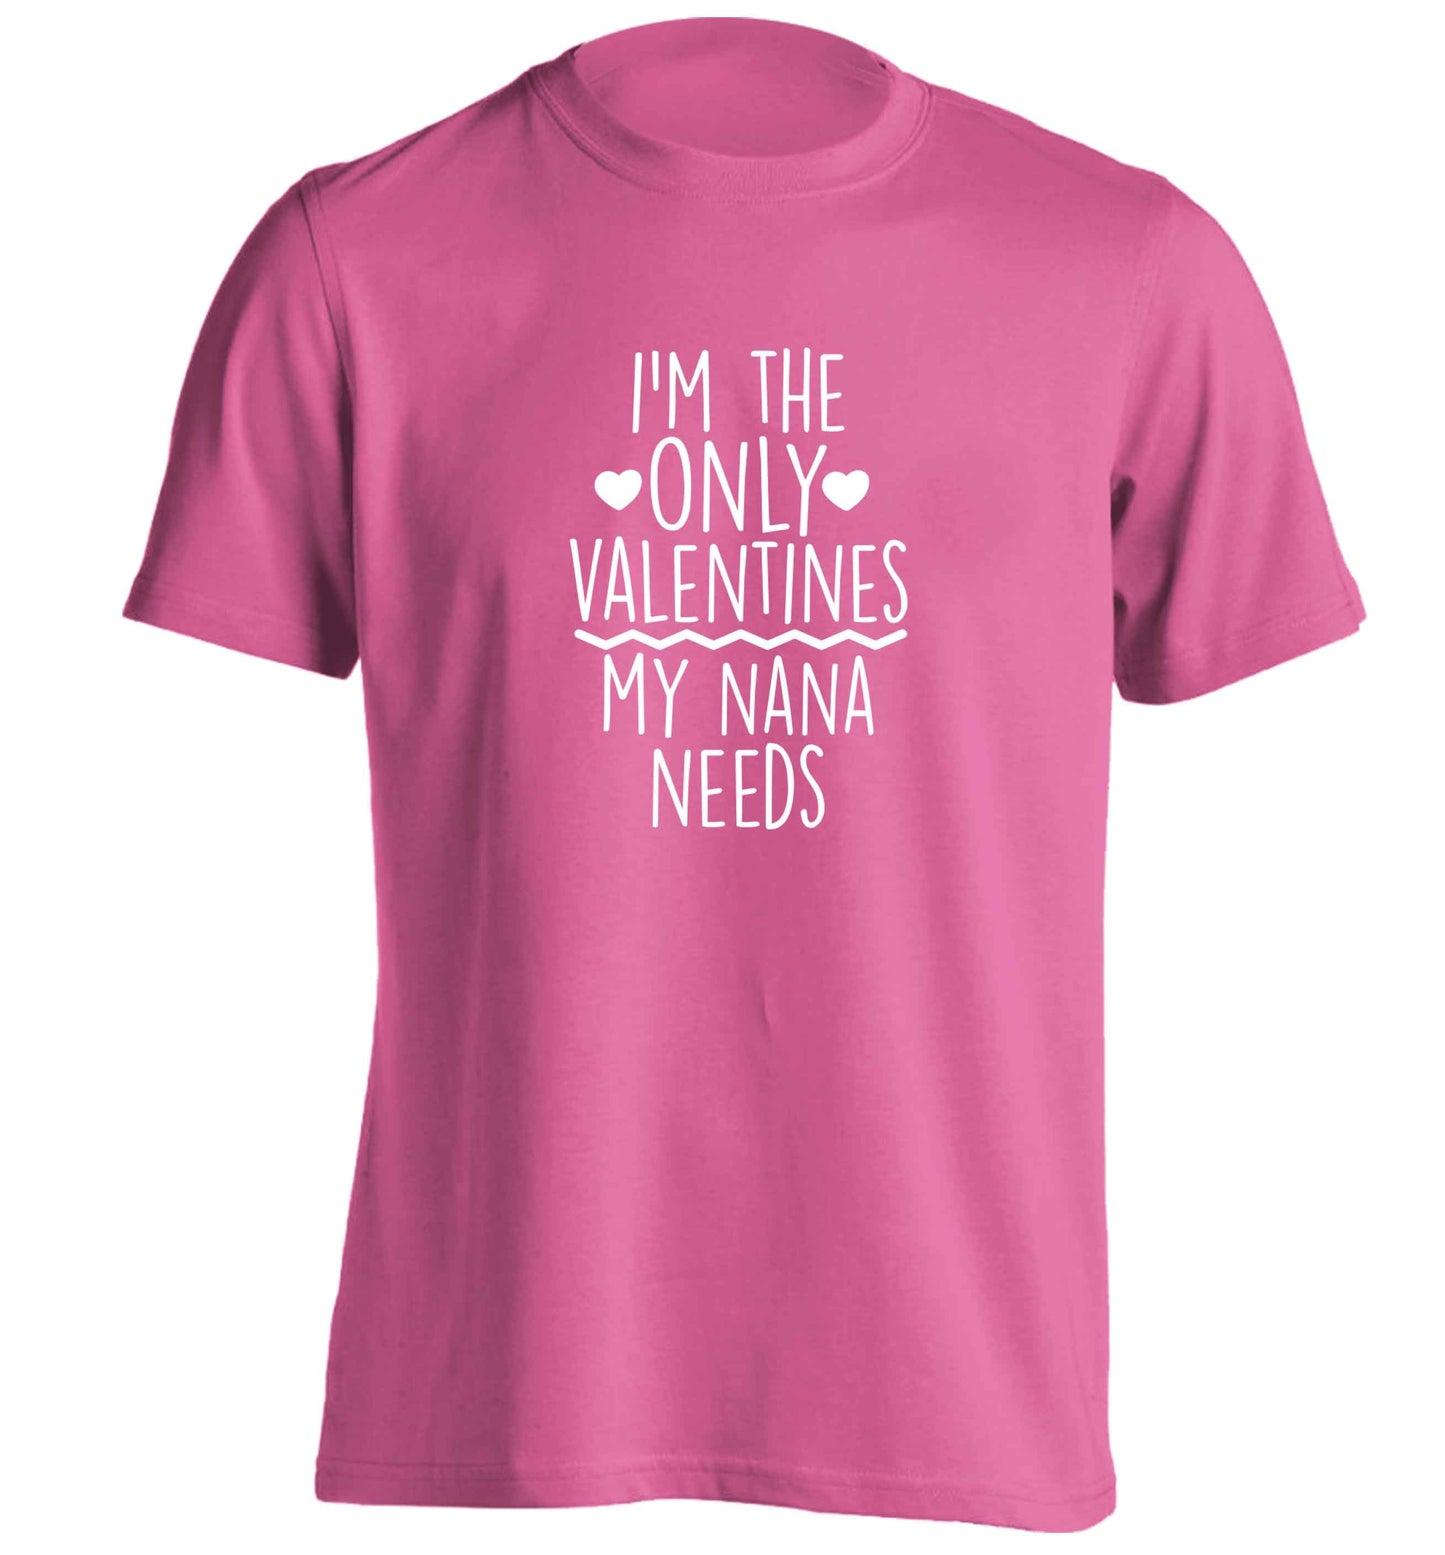 I'm the only valentines my nana needs adults unisex pink Tshirt 2XL